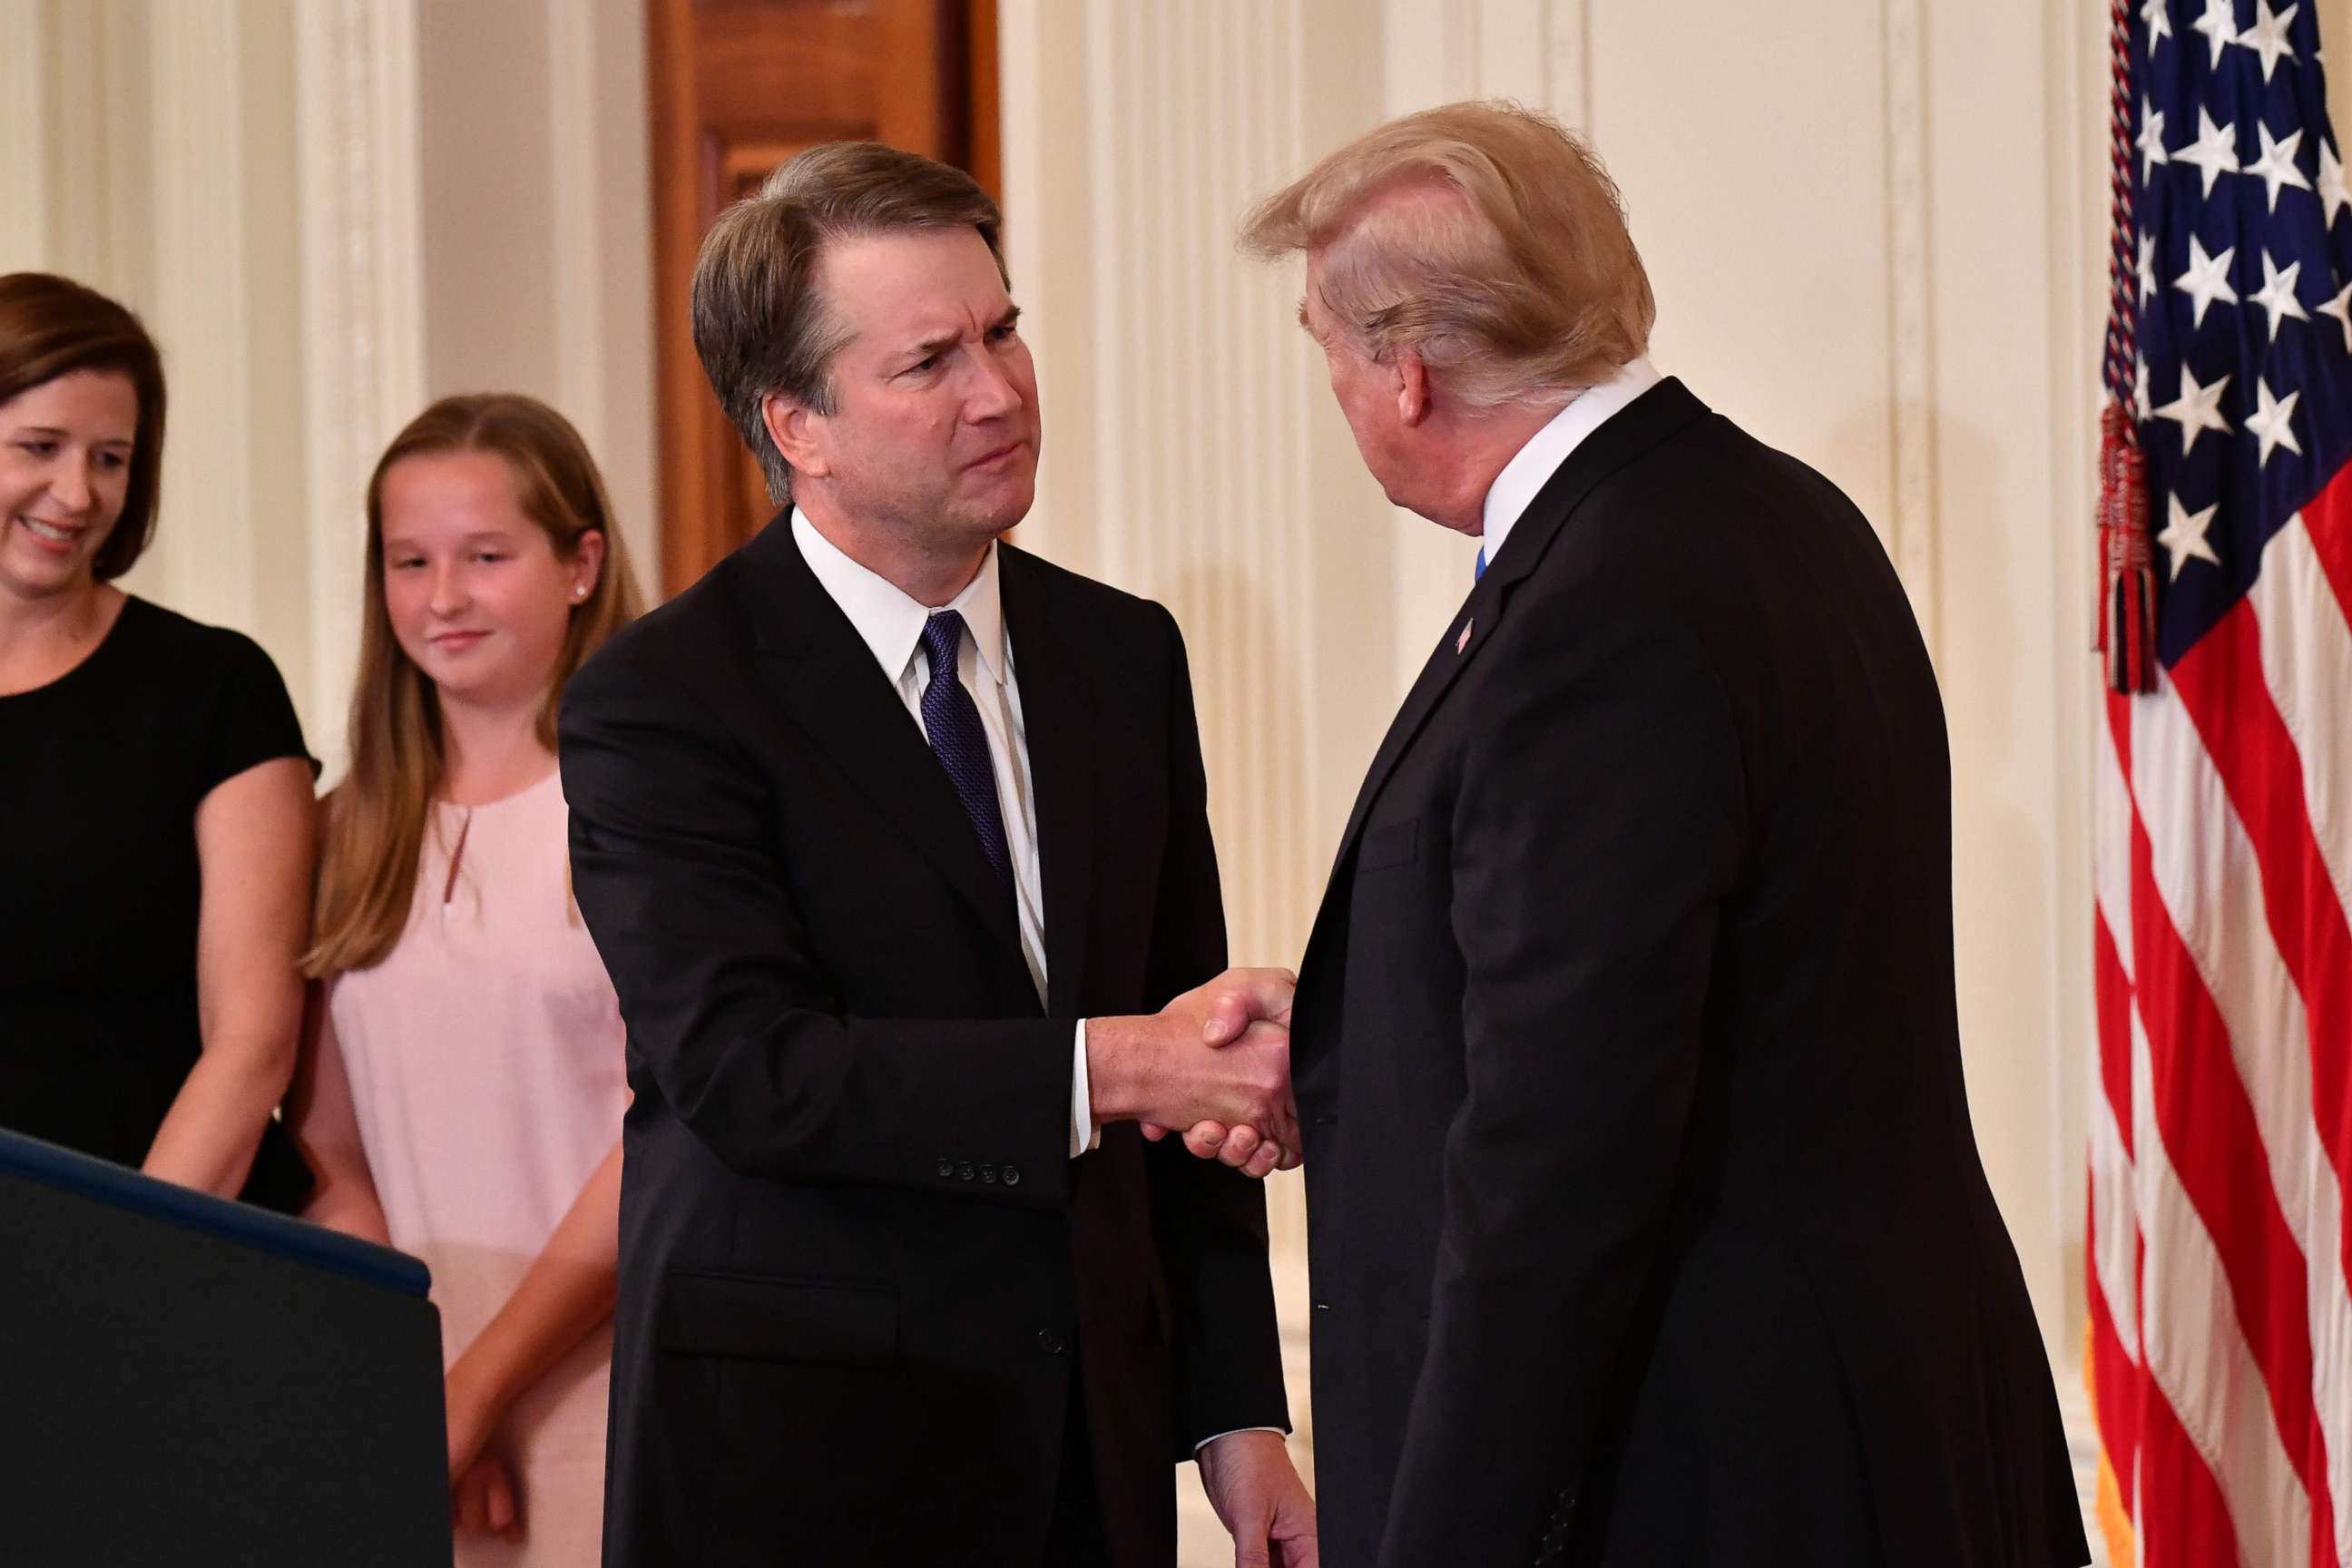 PHOTO: Supreme Court nominee Brett Kavanaugh shakes hands with President Donald Trump after he announced his nomination in the East Room of the White House on July 9, 2018 in Washington.